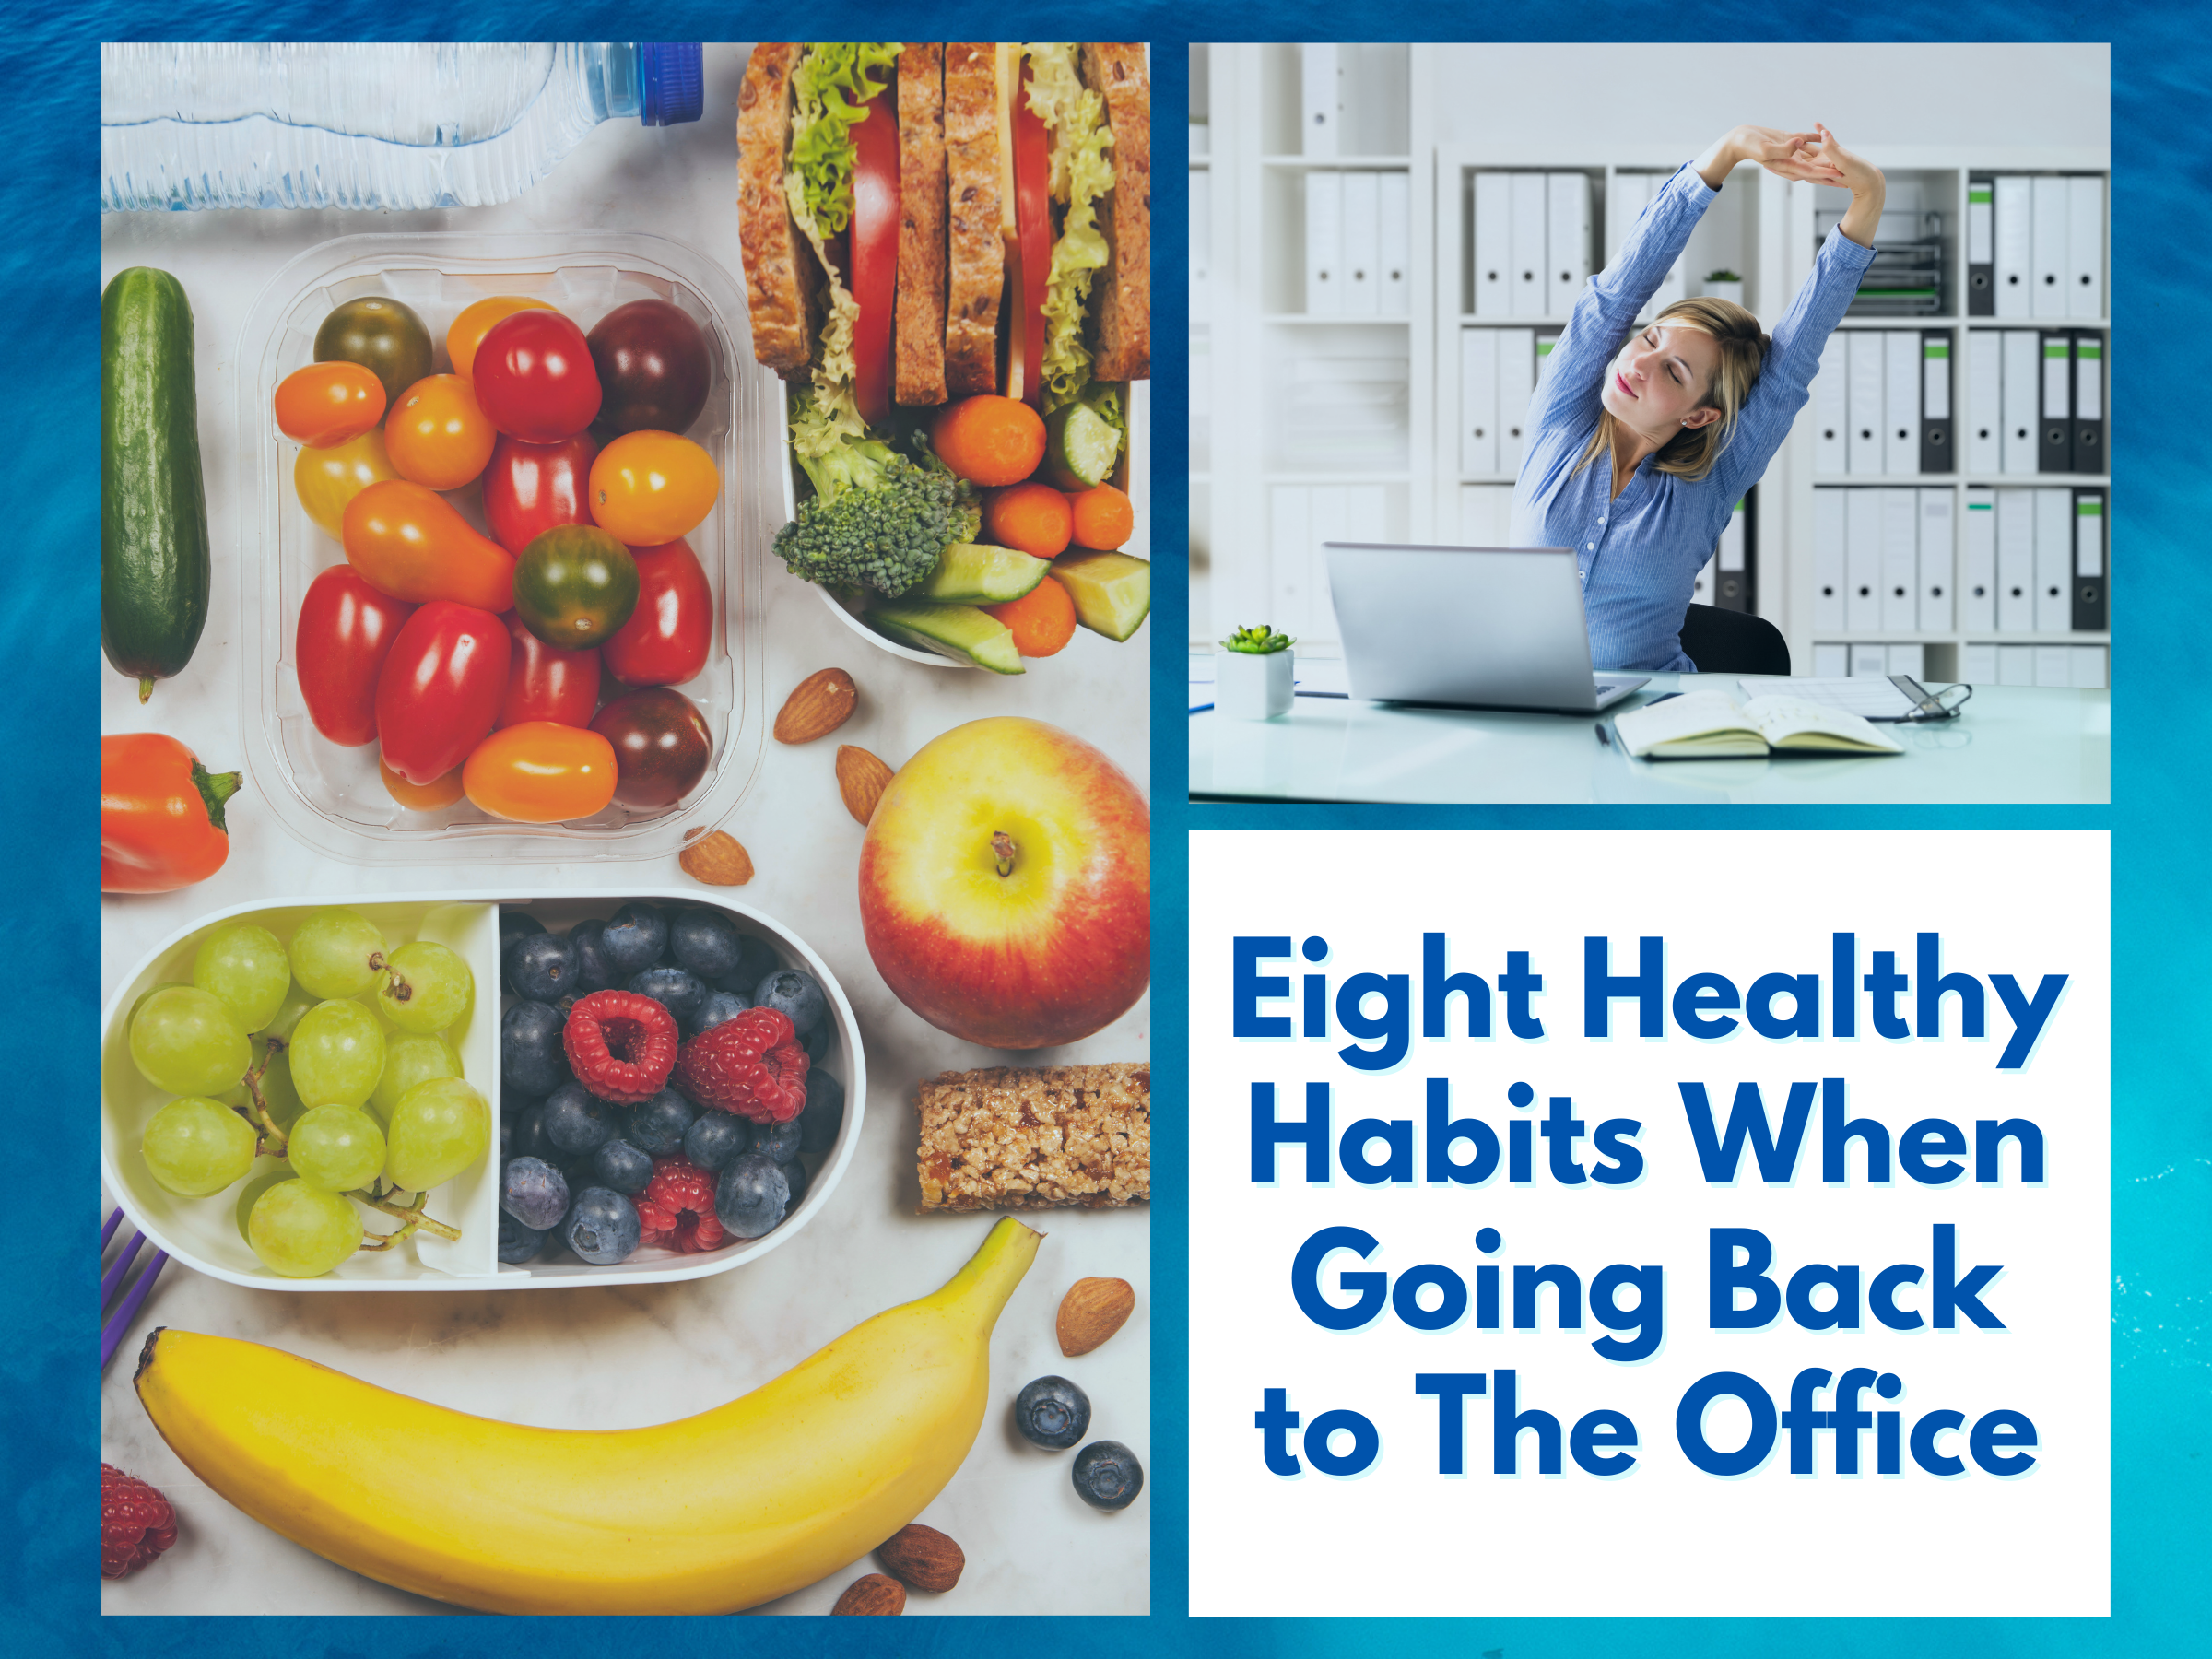 Eight Healthy Habits to Start When Going Back to the Office